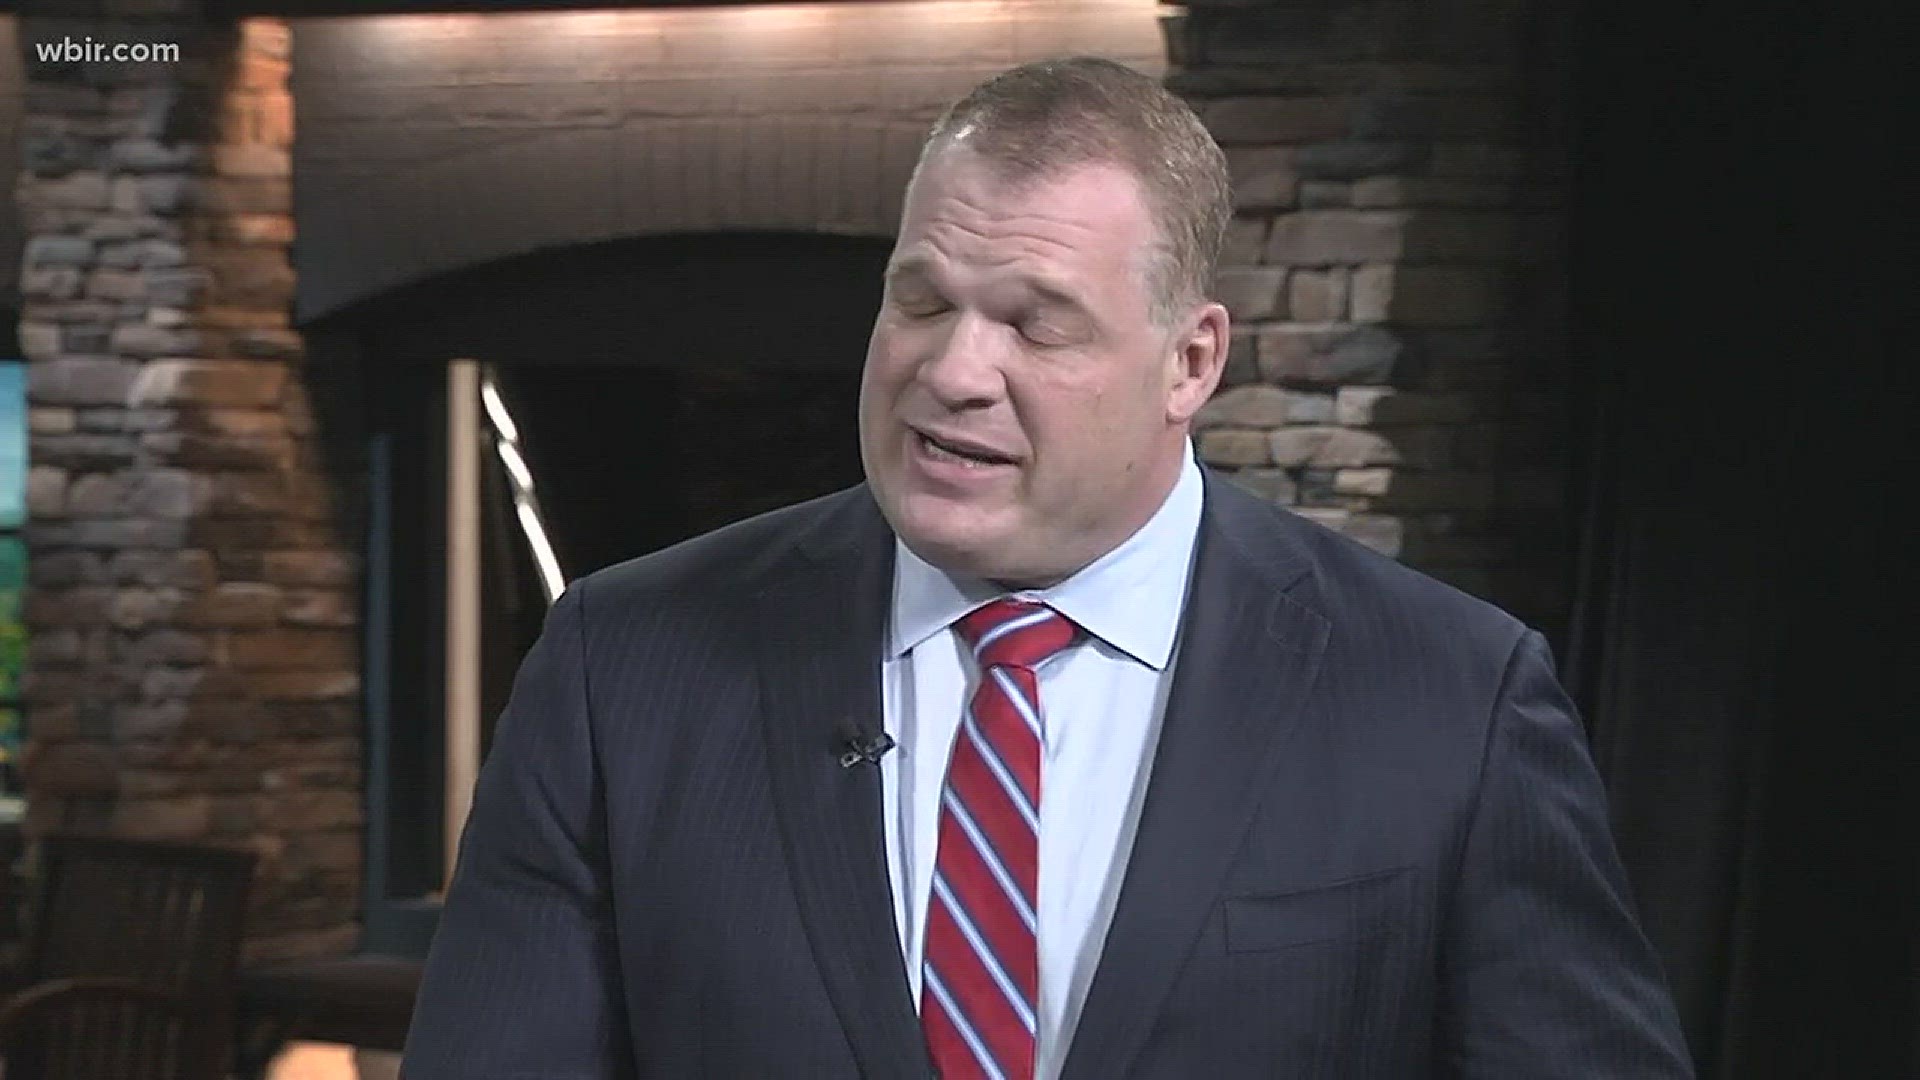 Feb. 1, 2018: Knox County mayoral candidate Glenn Jacobs talks about his priorities for public safety.